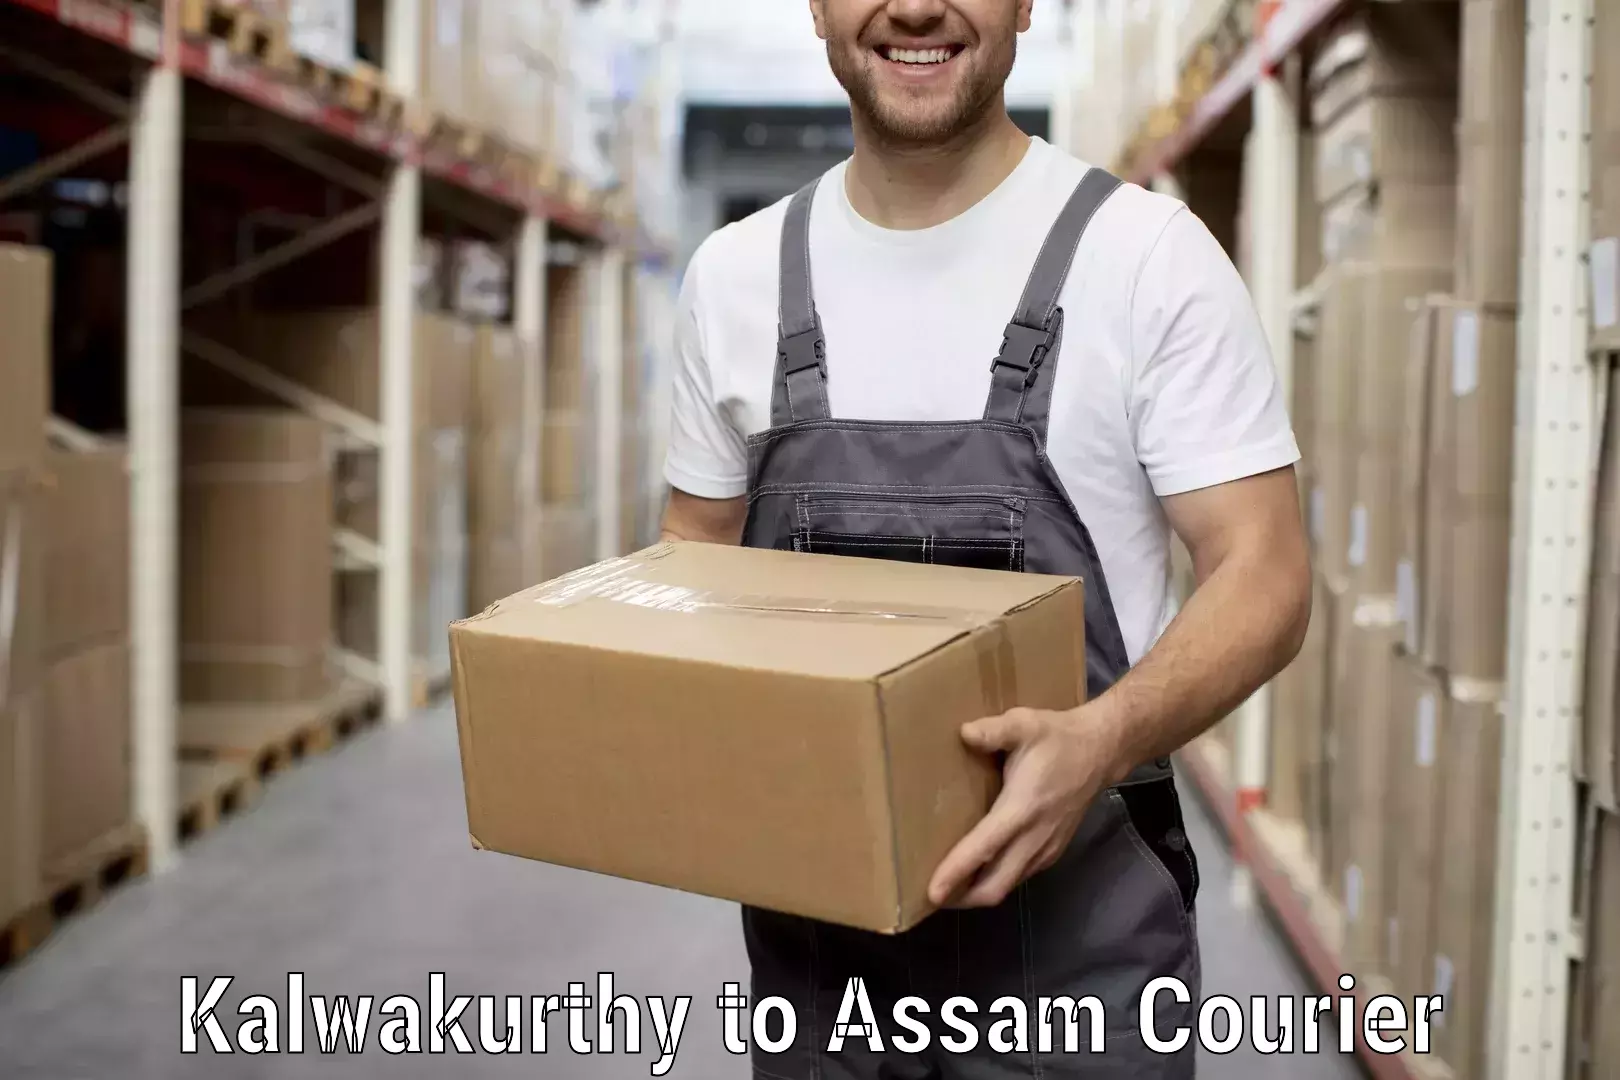 Quality relocation services in Kalwakurthy to Guwahati